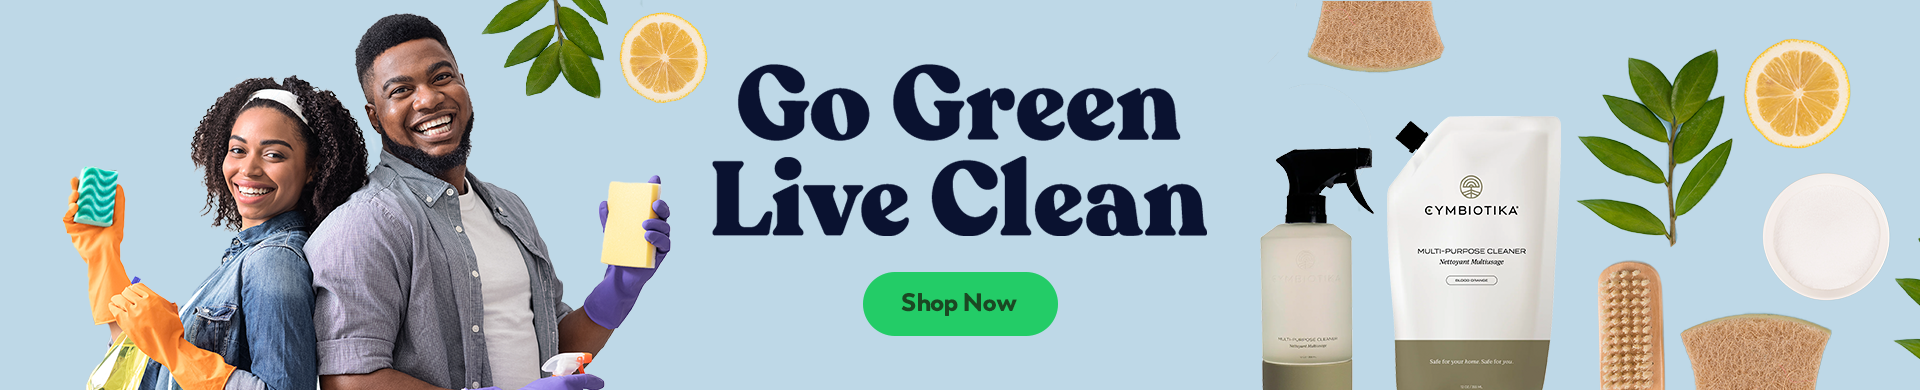 Go Green, Live Clean